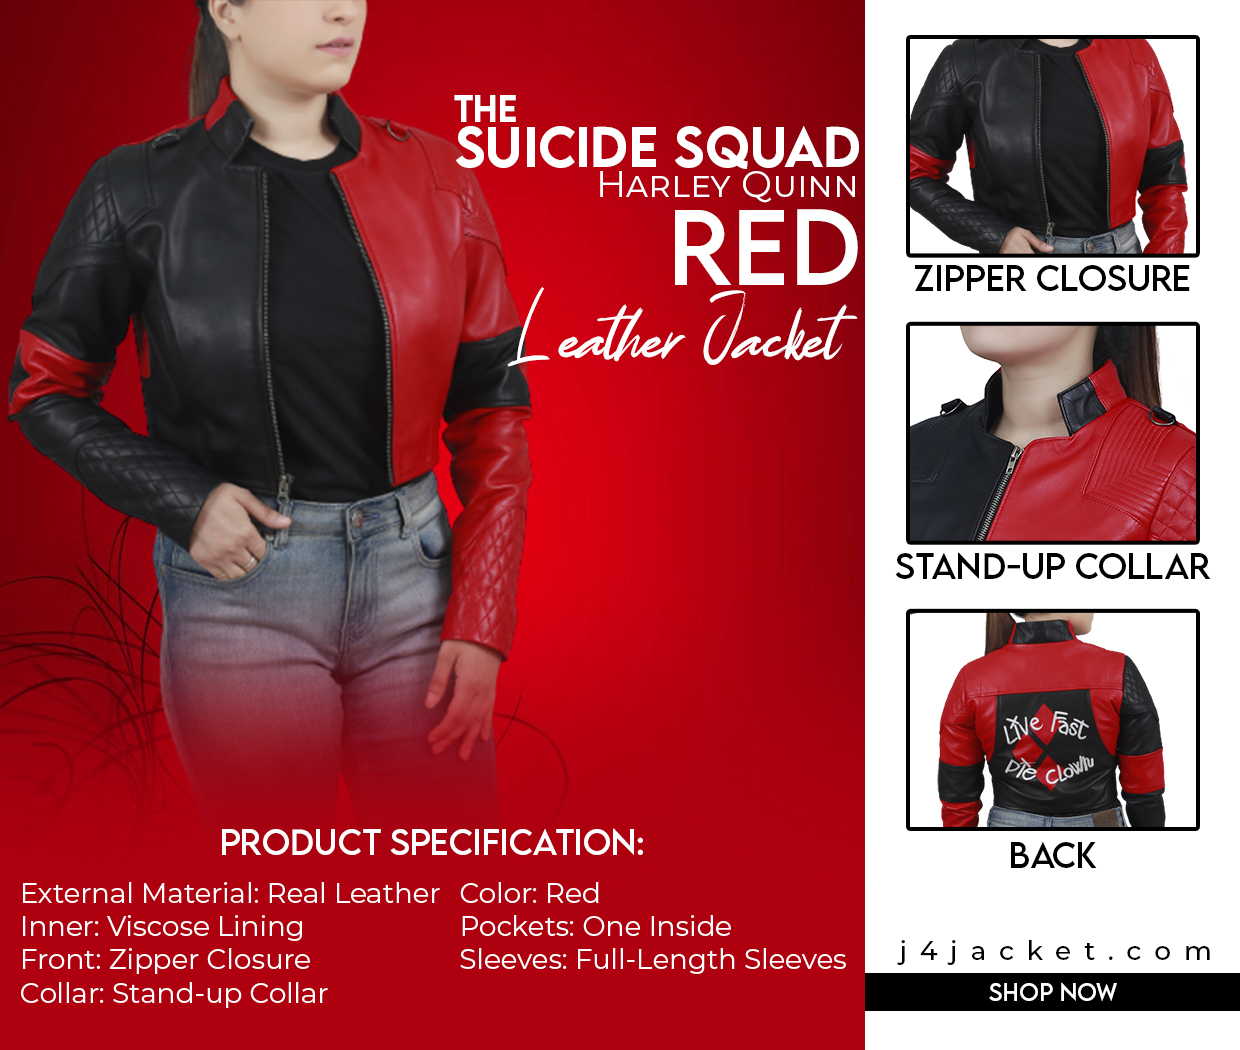 Suicide Squad Harley Quinn Red Leather Jacket Infographic Post